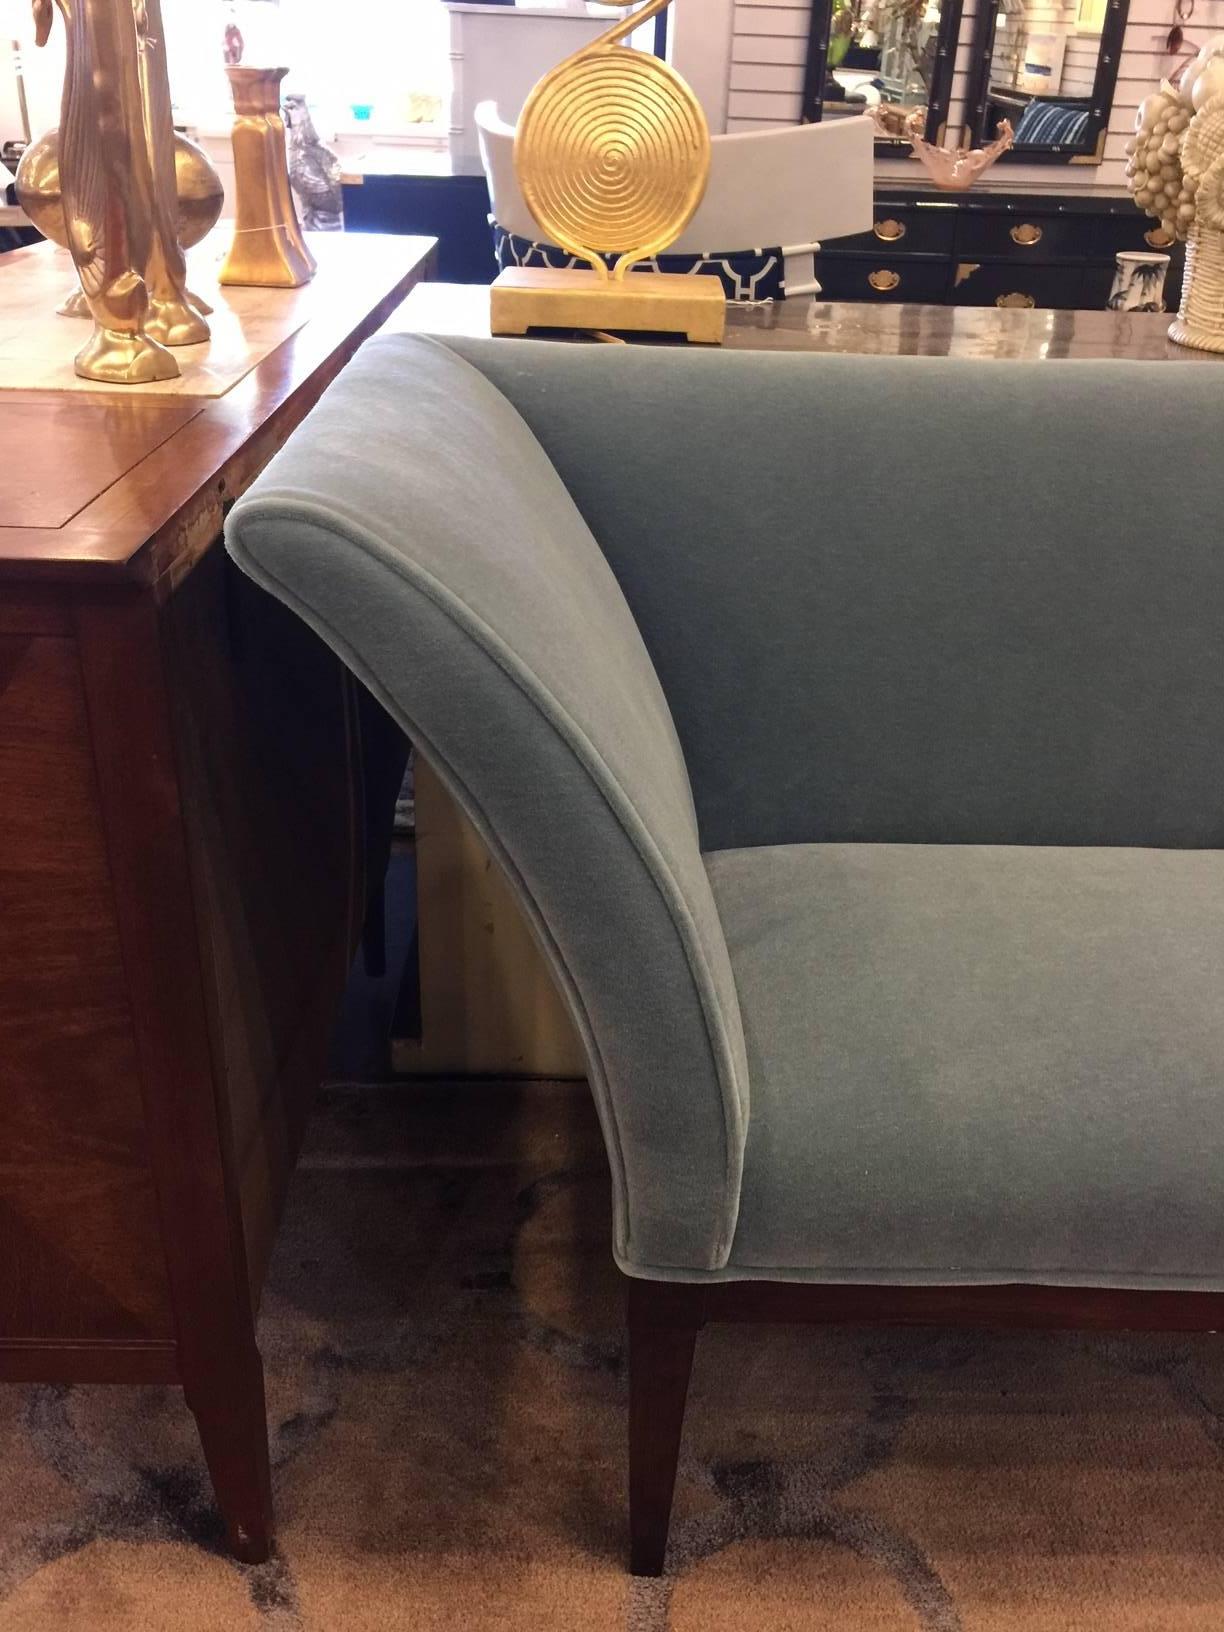 This vintage Midcentury piece has been restored to former glory. It is elegant, curvaceous, and sublime in its simplicity. Newly reupholstered in a plush mohair in a dusty teal shade.